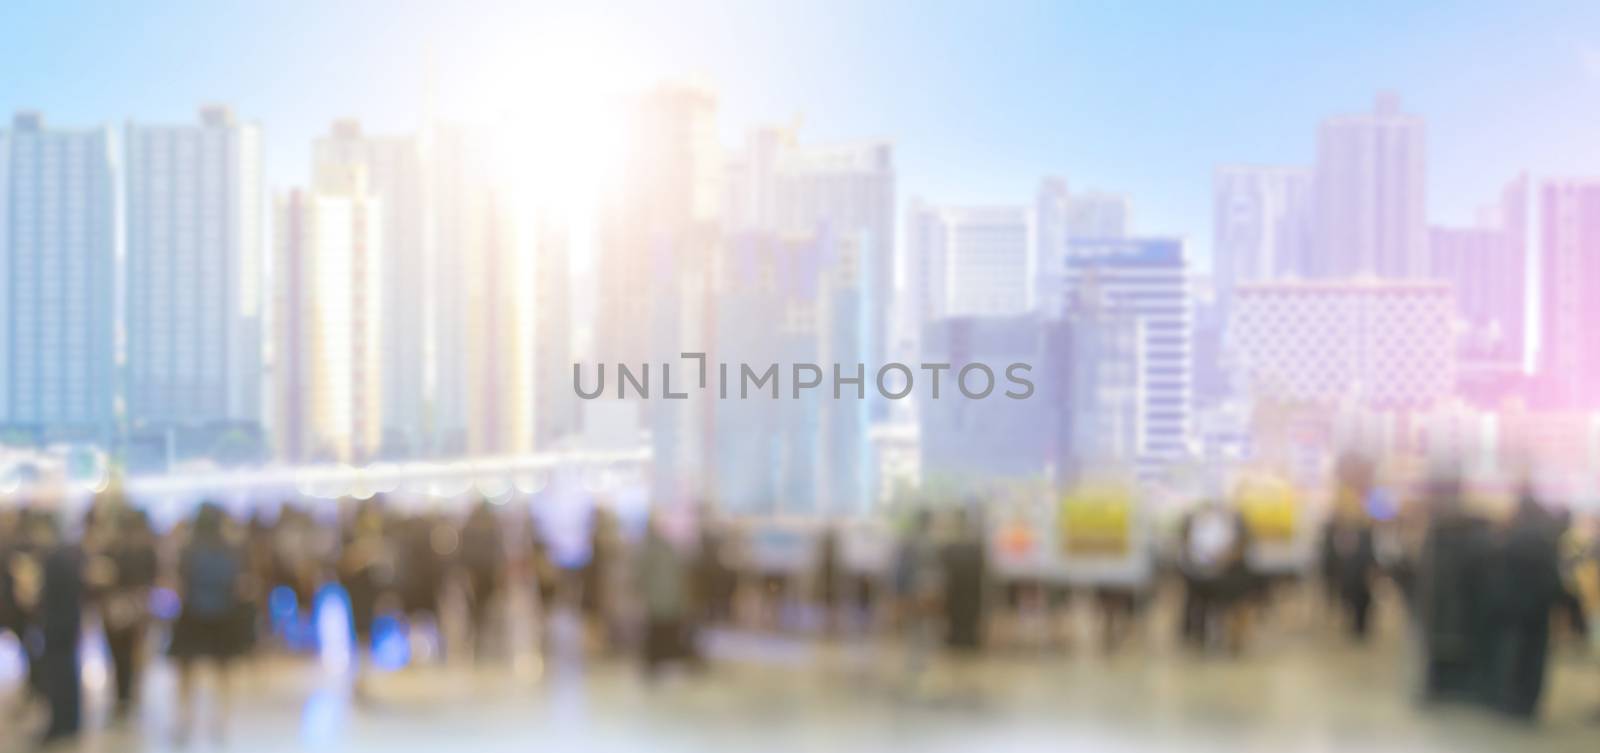 The people in city background and tall buildings Blurred images